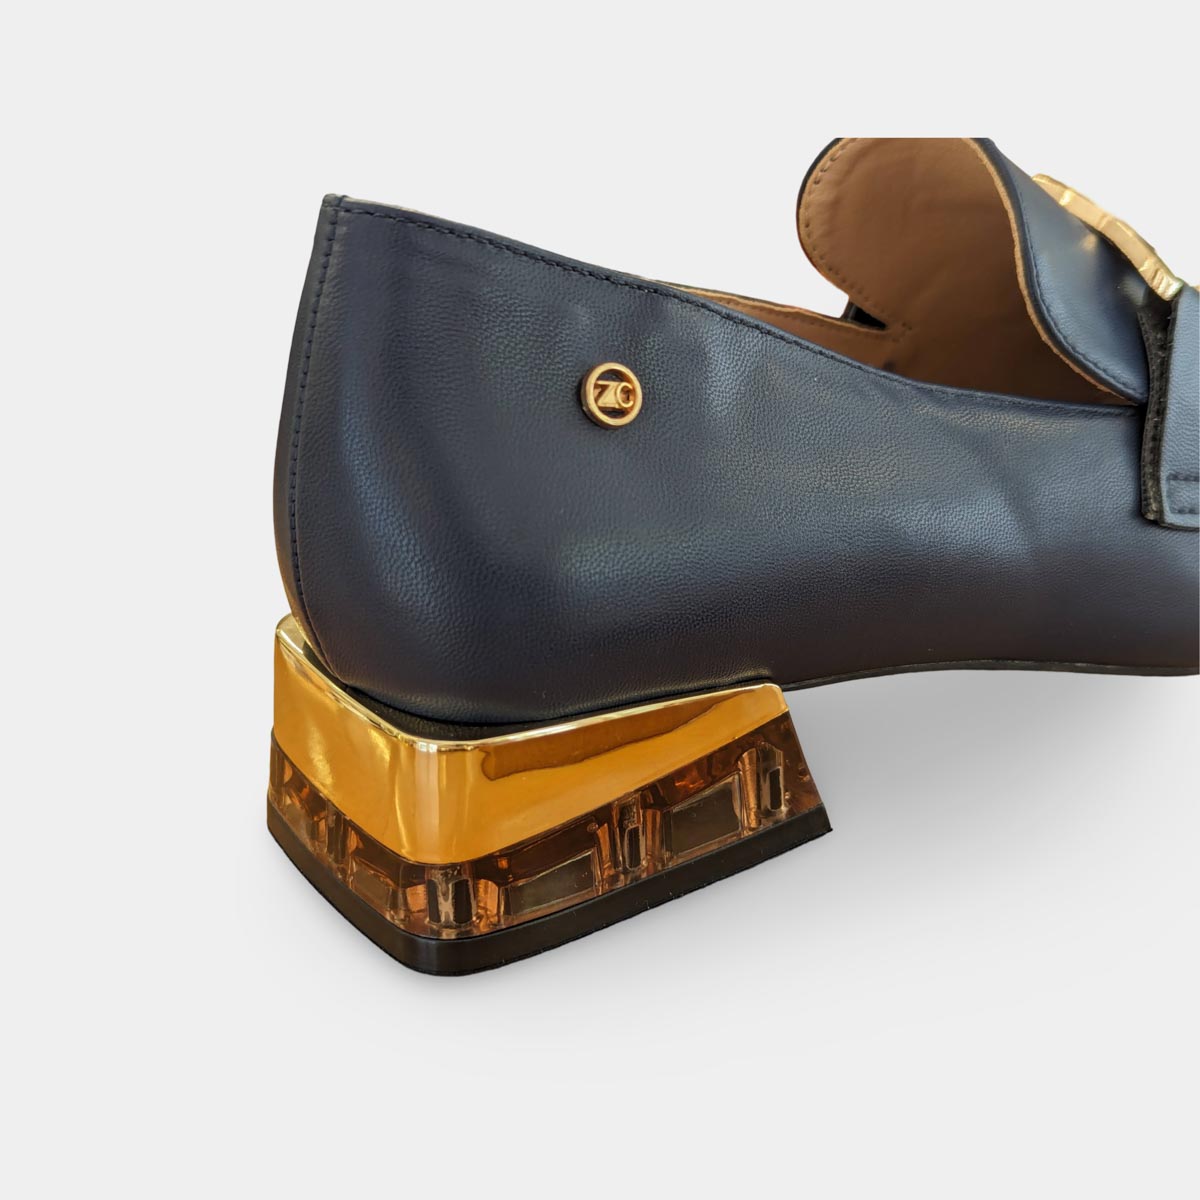 Overall view showing the stylish and practical design of the Zanni & Co loafers.